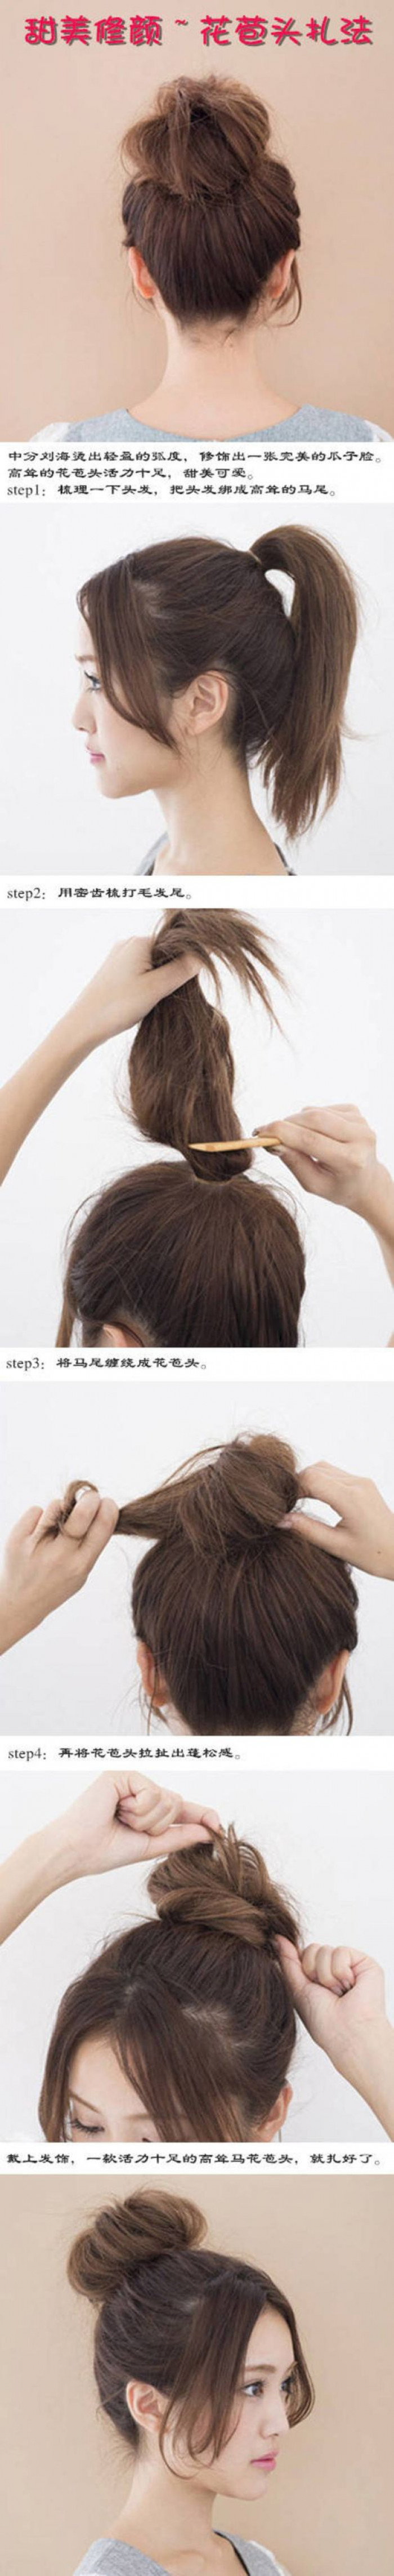 Japanese Hairstyle That Will Get You Infinite Boyfriends 